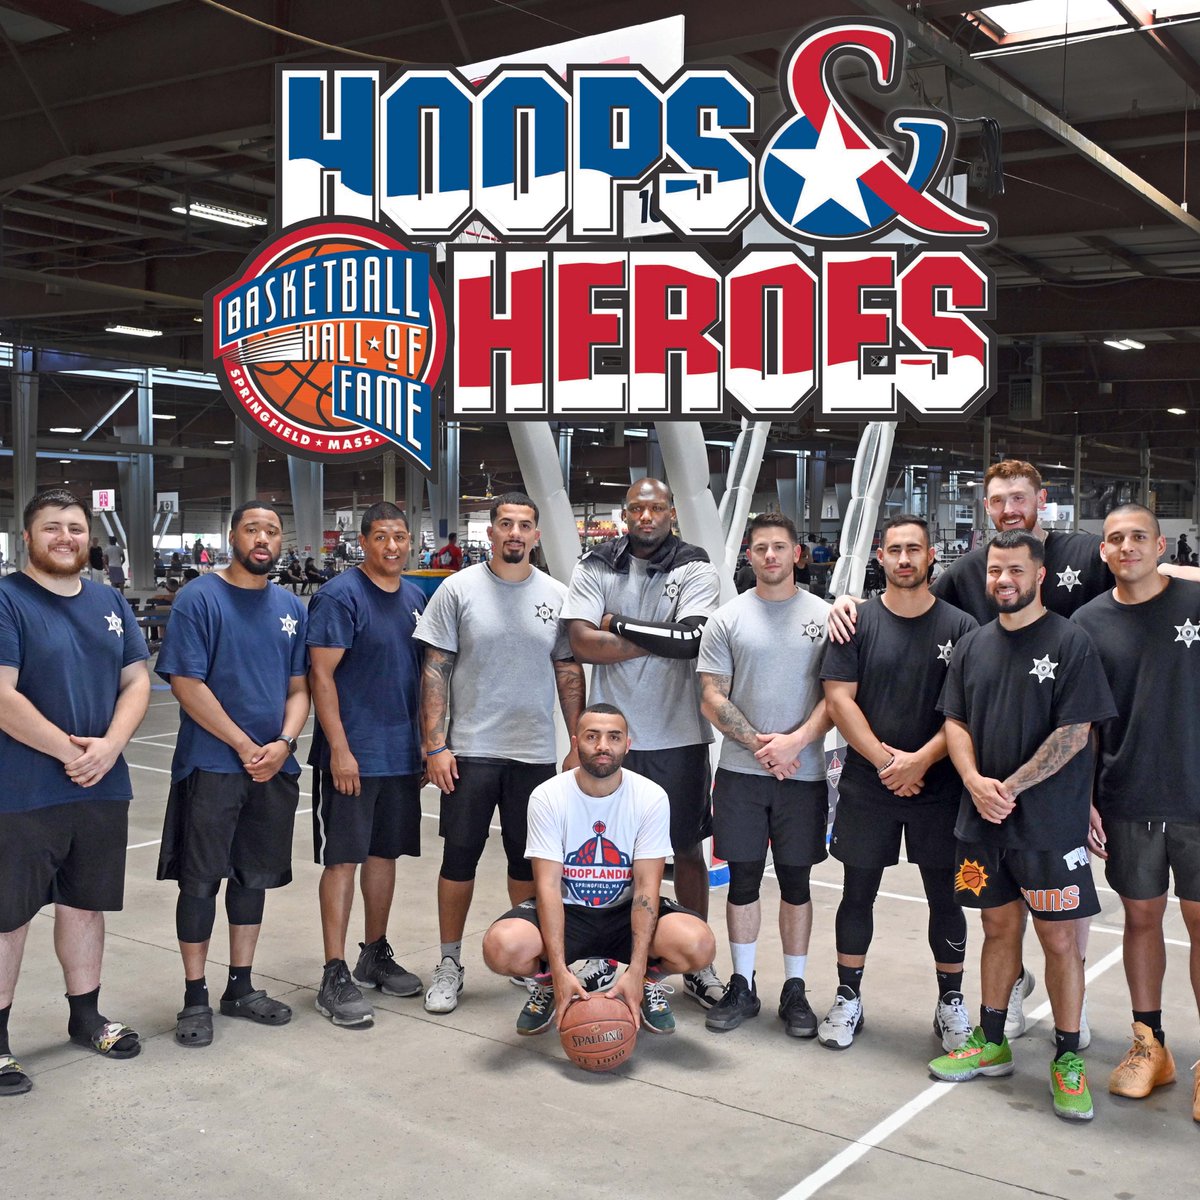 Calling active and retired First Responders and Military personnel to get in the game! The Hoops & Heroes division, sponsored by Hampden County Sheriff's Office & supported by @hoophall, is a tribute to the courage and commitment of our everyday heroes. bit.ly/HooplandiaRegi…